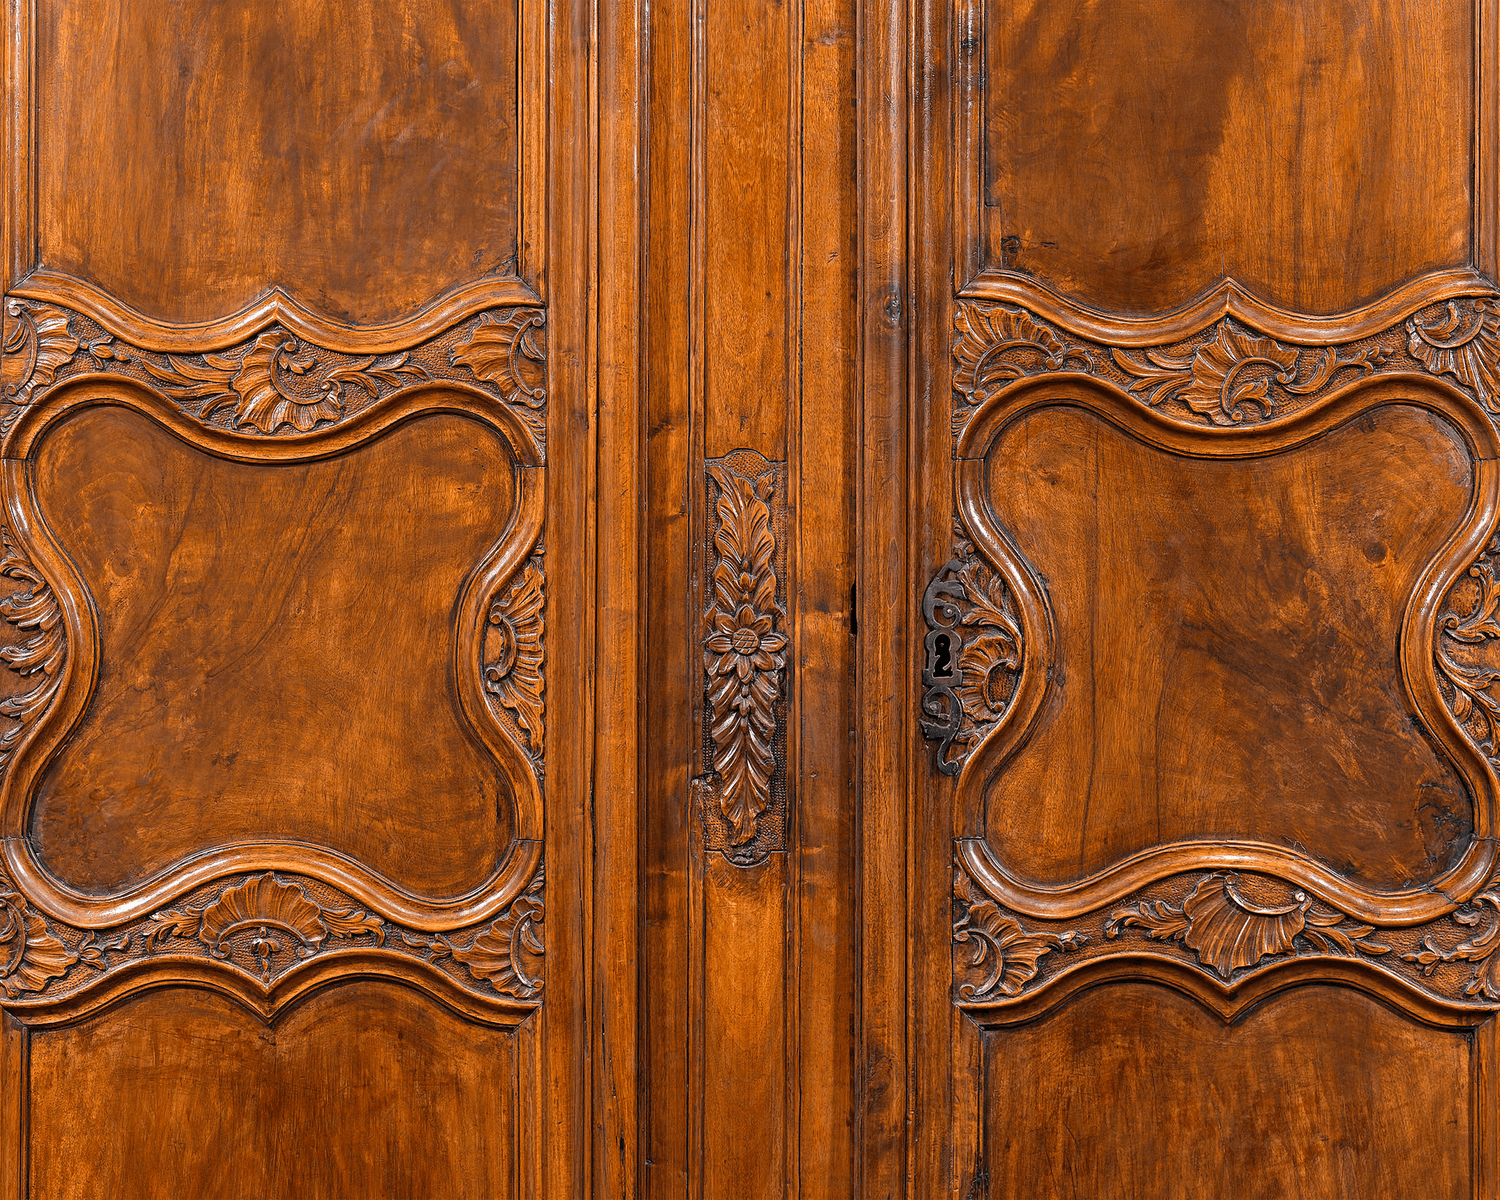 Elegant rocaille carvings distinguish this armoire